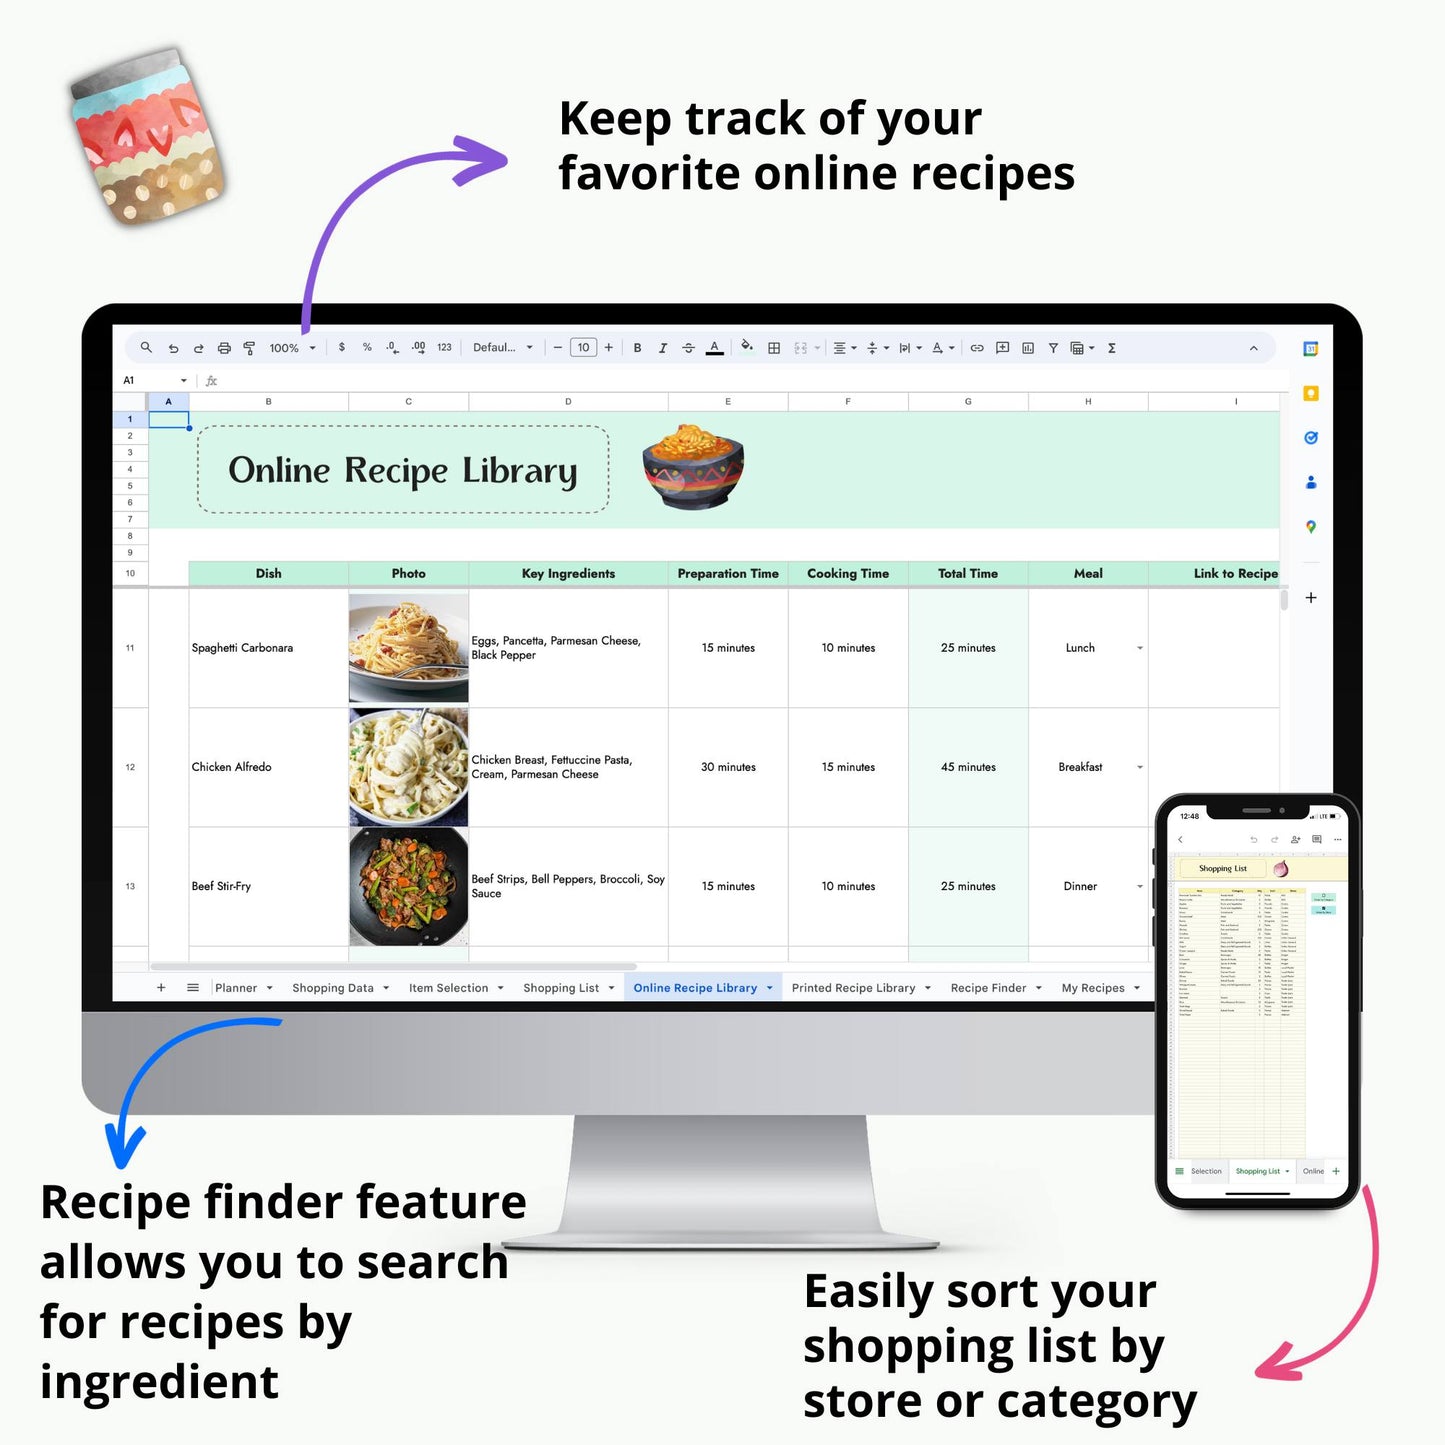 Text "keep track of your favorite online recipes. Recipe finder feature allows you to search for recipes by ingredient. Easily sort your shopping list by store or category"